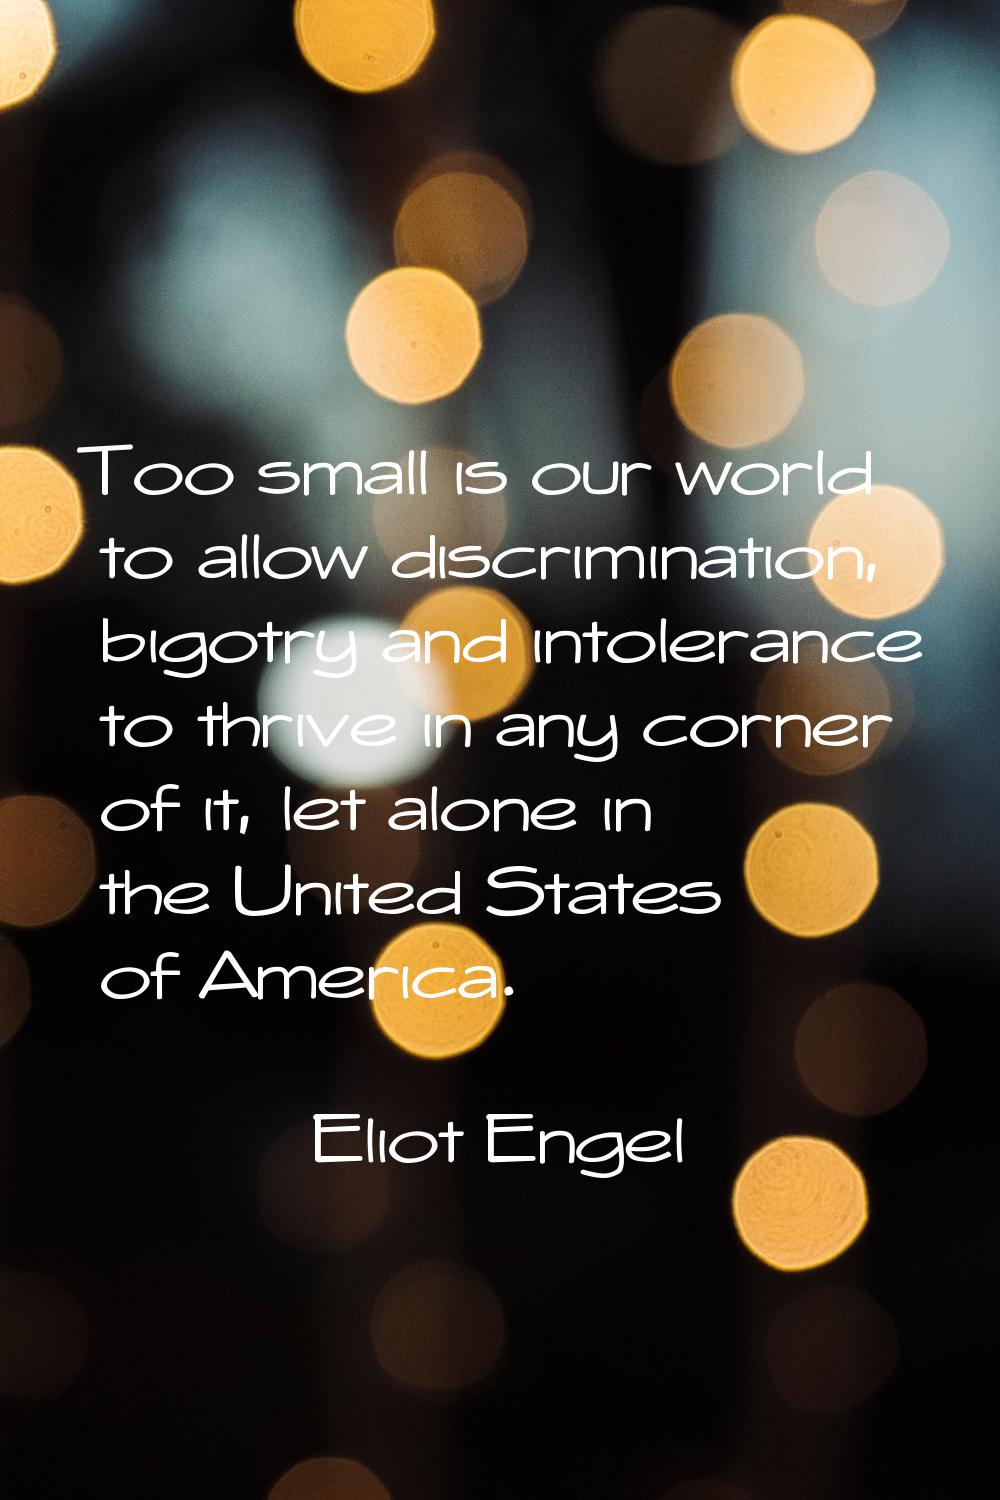 Too small is our world to allow discrimination, bigotry and intolerance to thrive in any corner of 